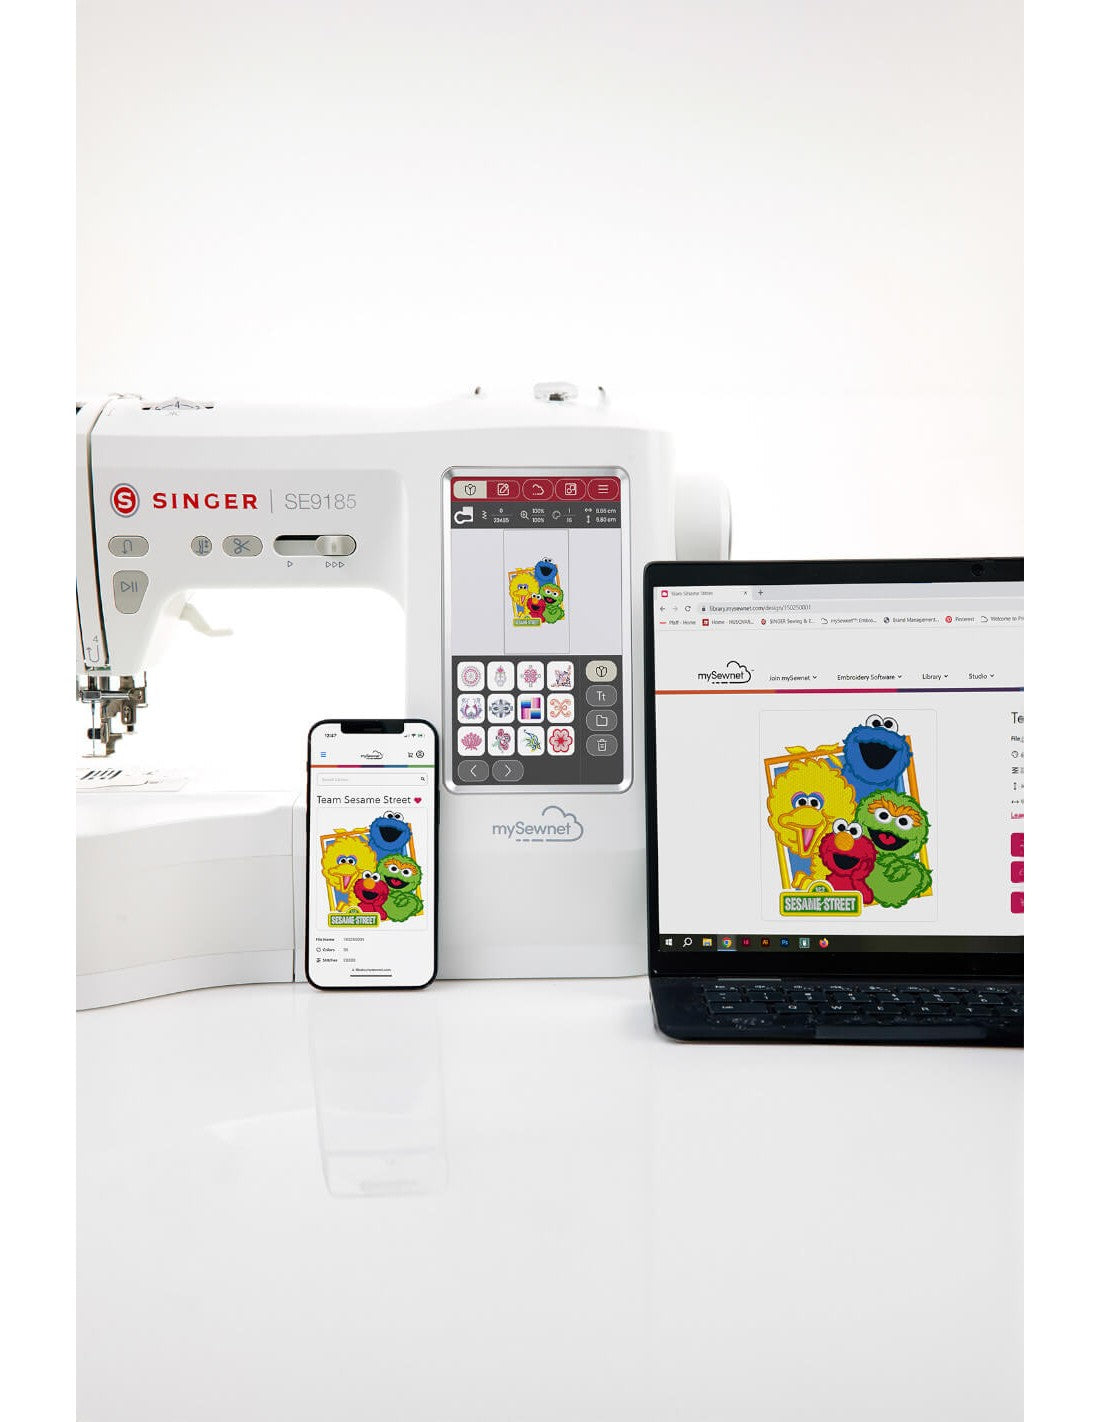 Singer SE9185 + FREE extension table worth £79.99 - Sewing, Quilting and Embroidery machine with WIFI, colour touchscreen. Includes a 90 day trial of MySewNet embroidery software